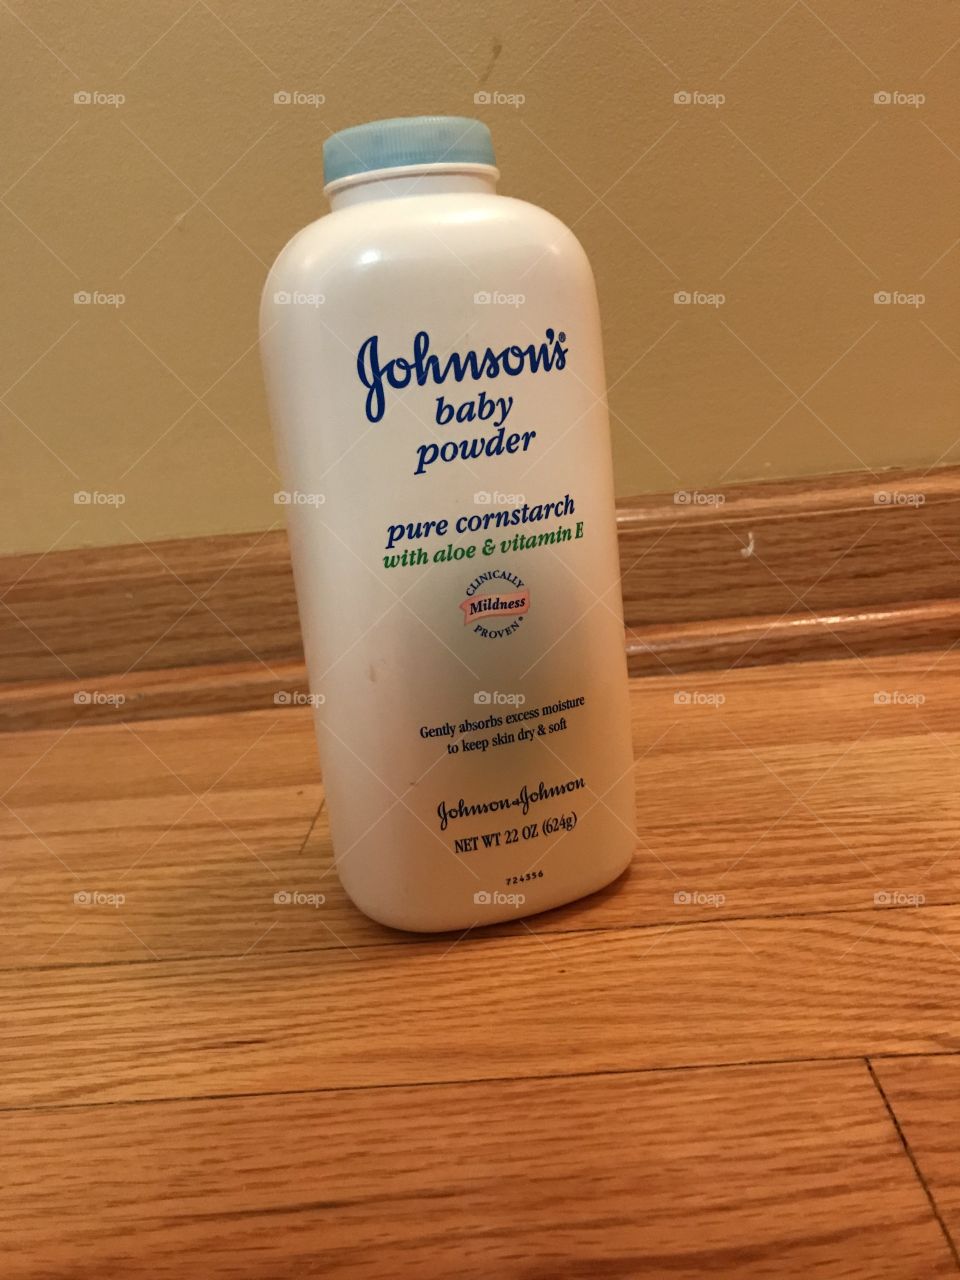 A great bottle of Johnson baby powder